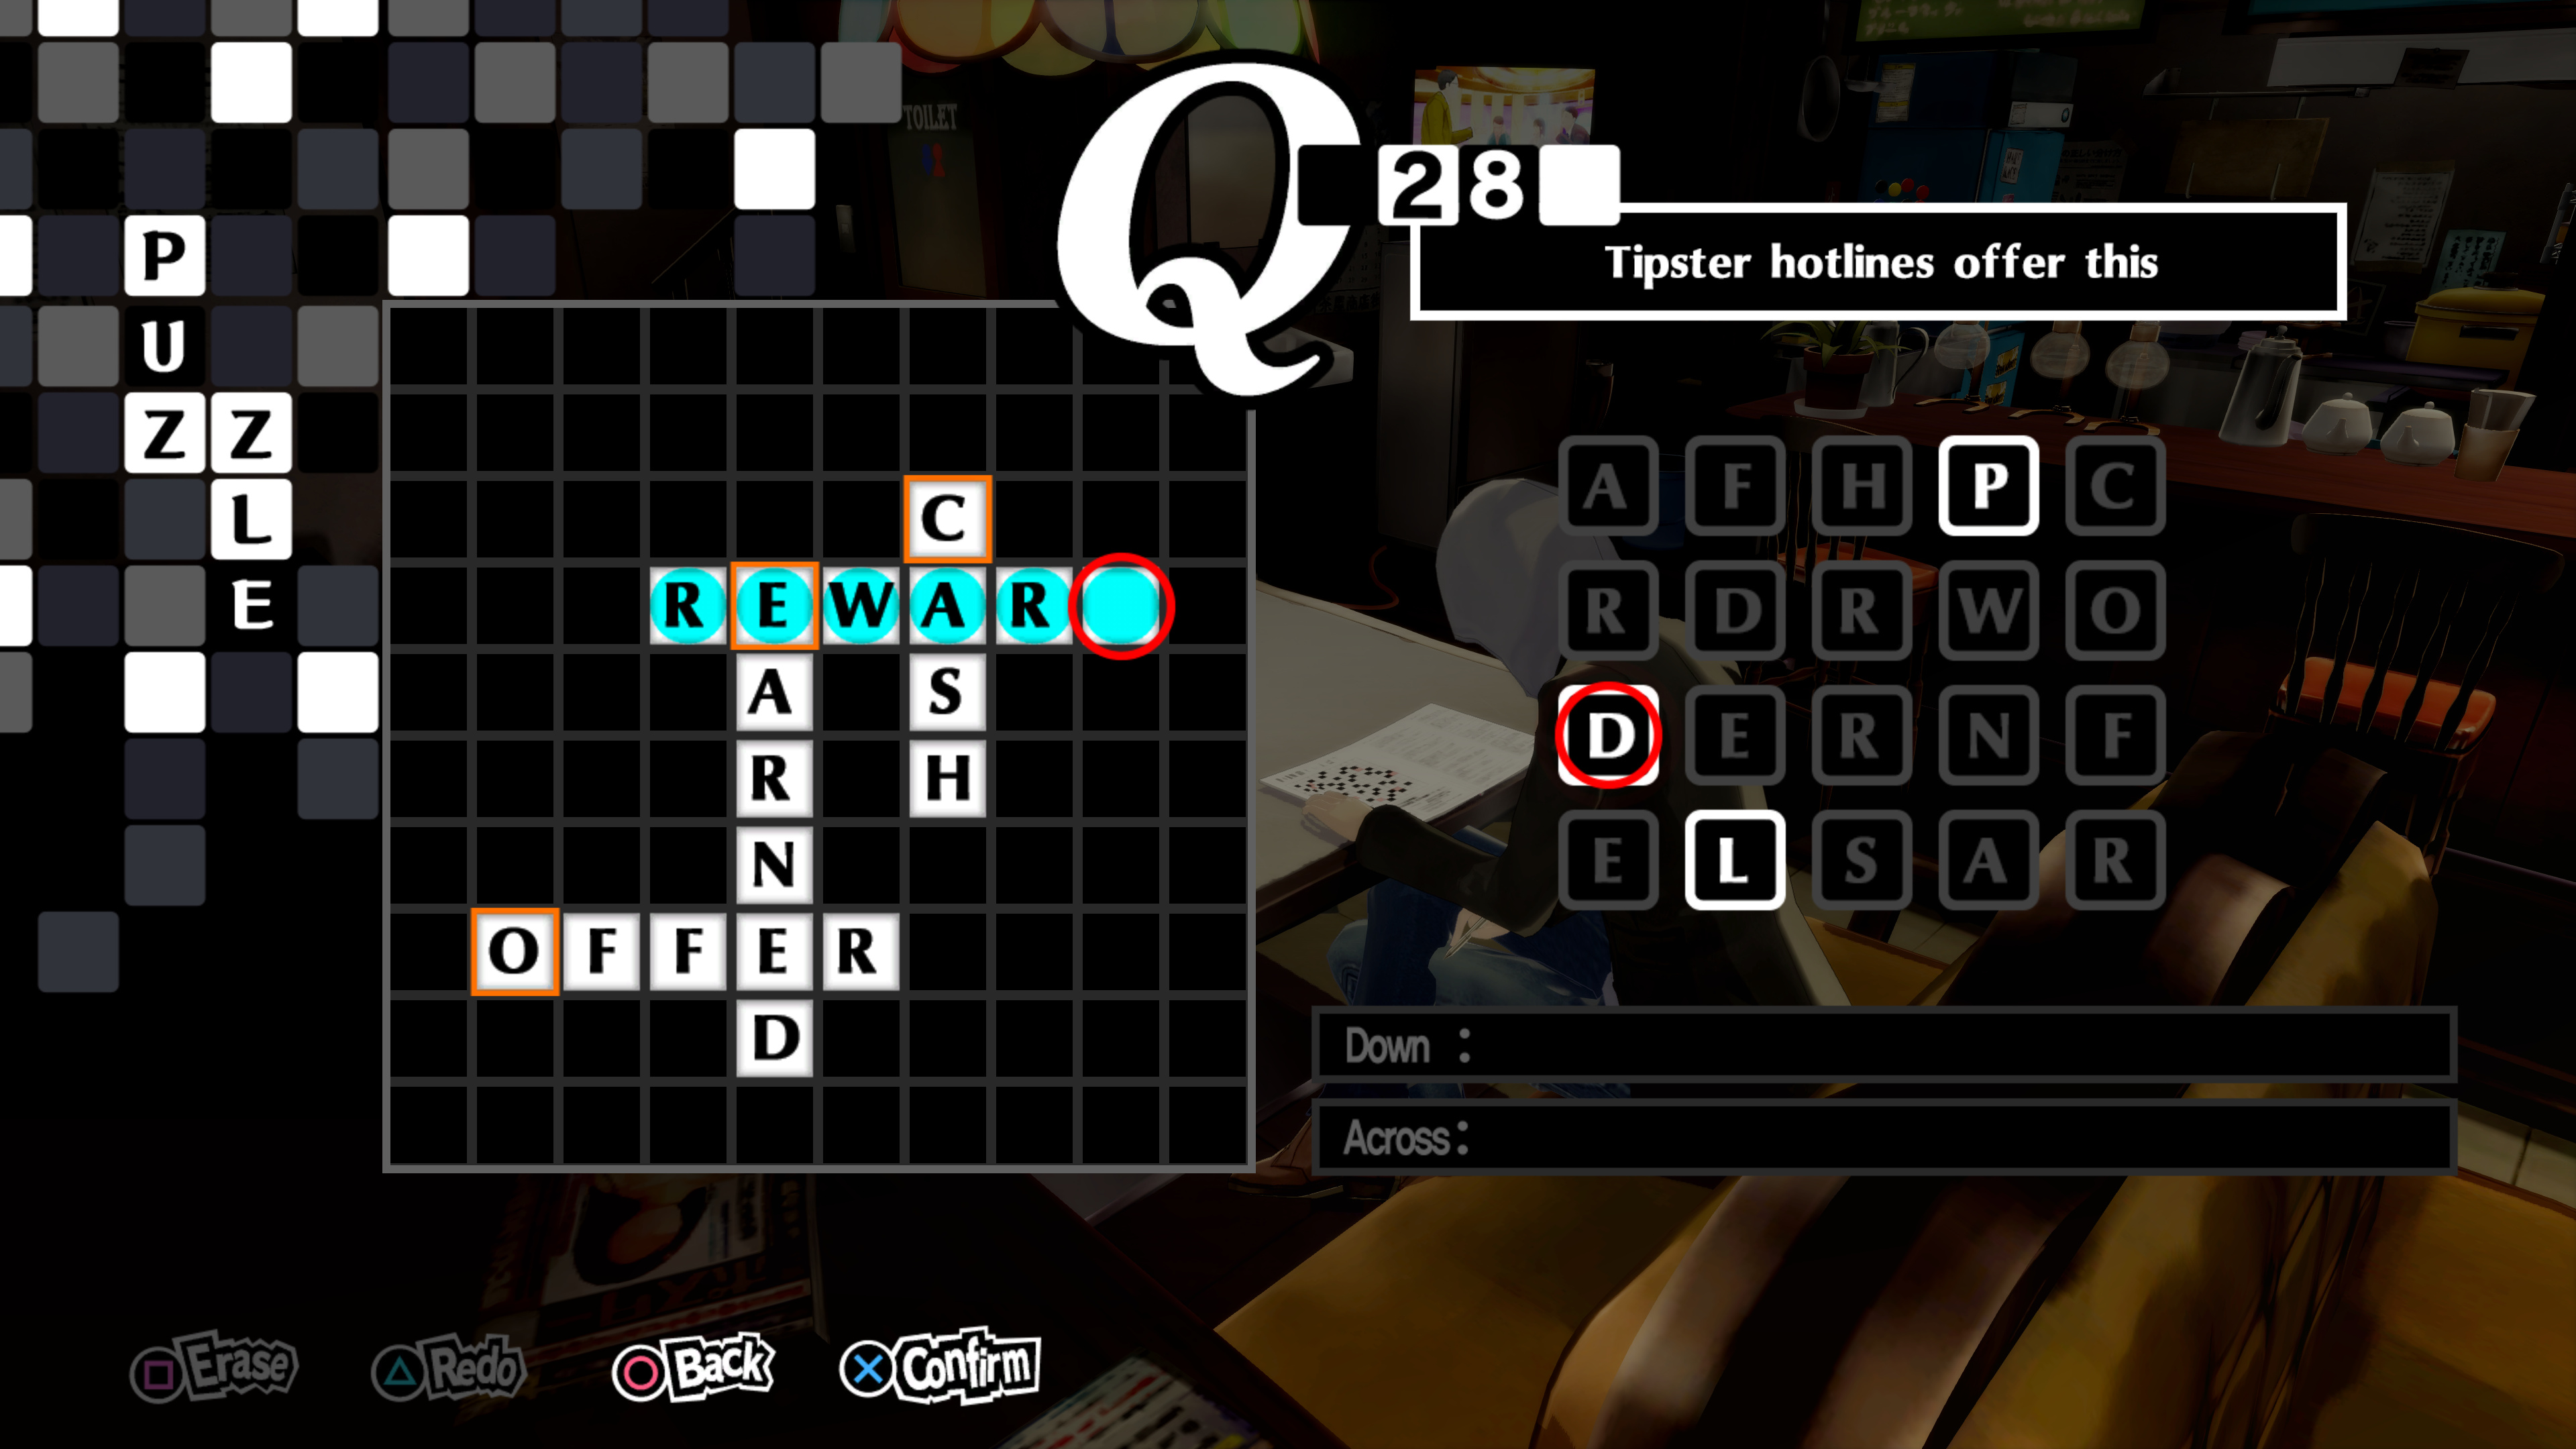 Persona 5 Royal Crossword Answers All Crossword Puzzles Solved Push Square